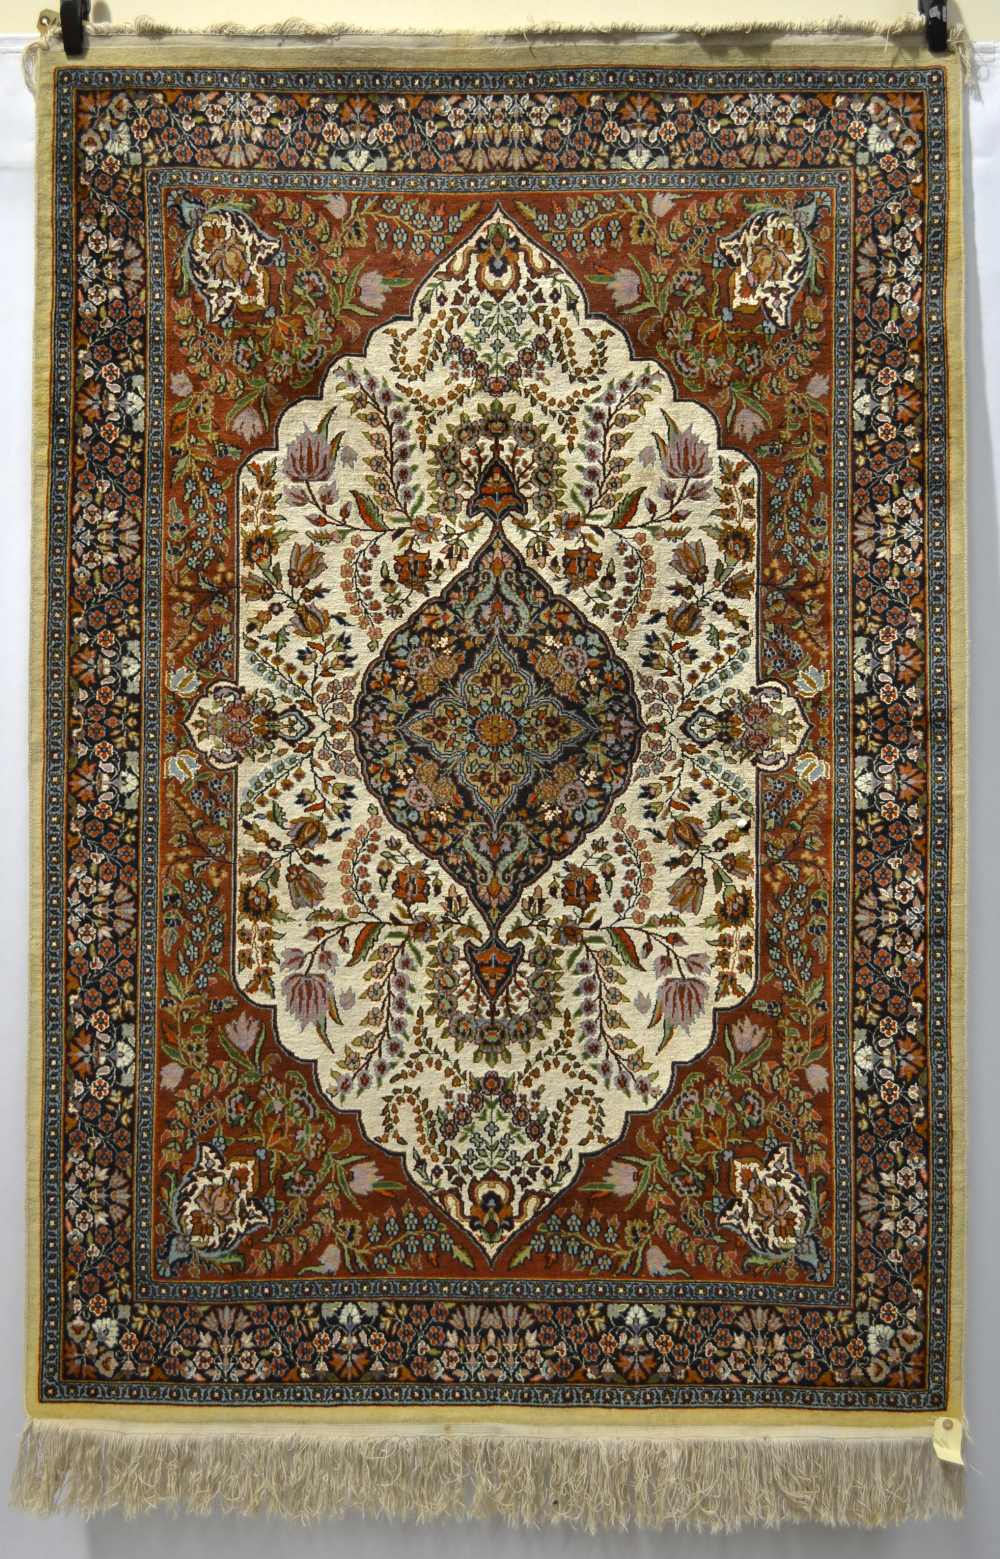 Kashmiri part silk rug, north India, 20th century, 6ft. 3in. x 4ft. 2in. 1.91m. x 1.27m. Note the